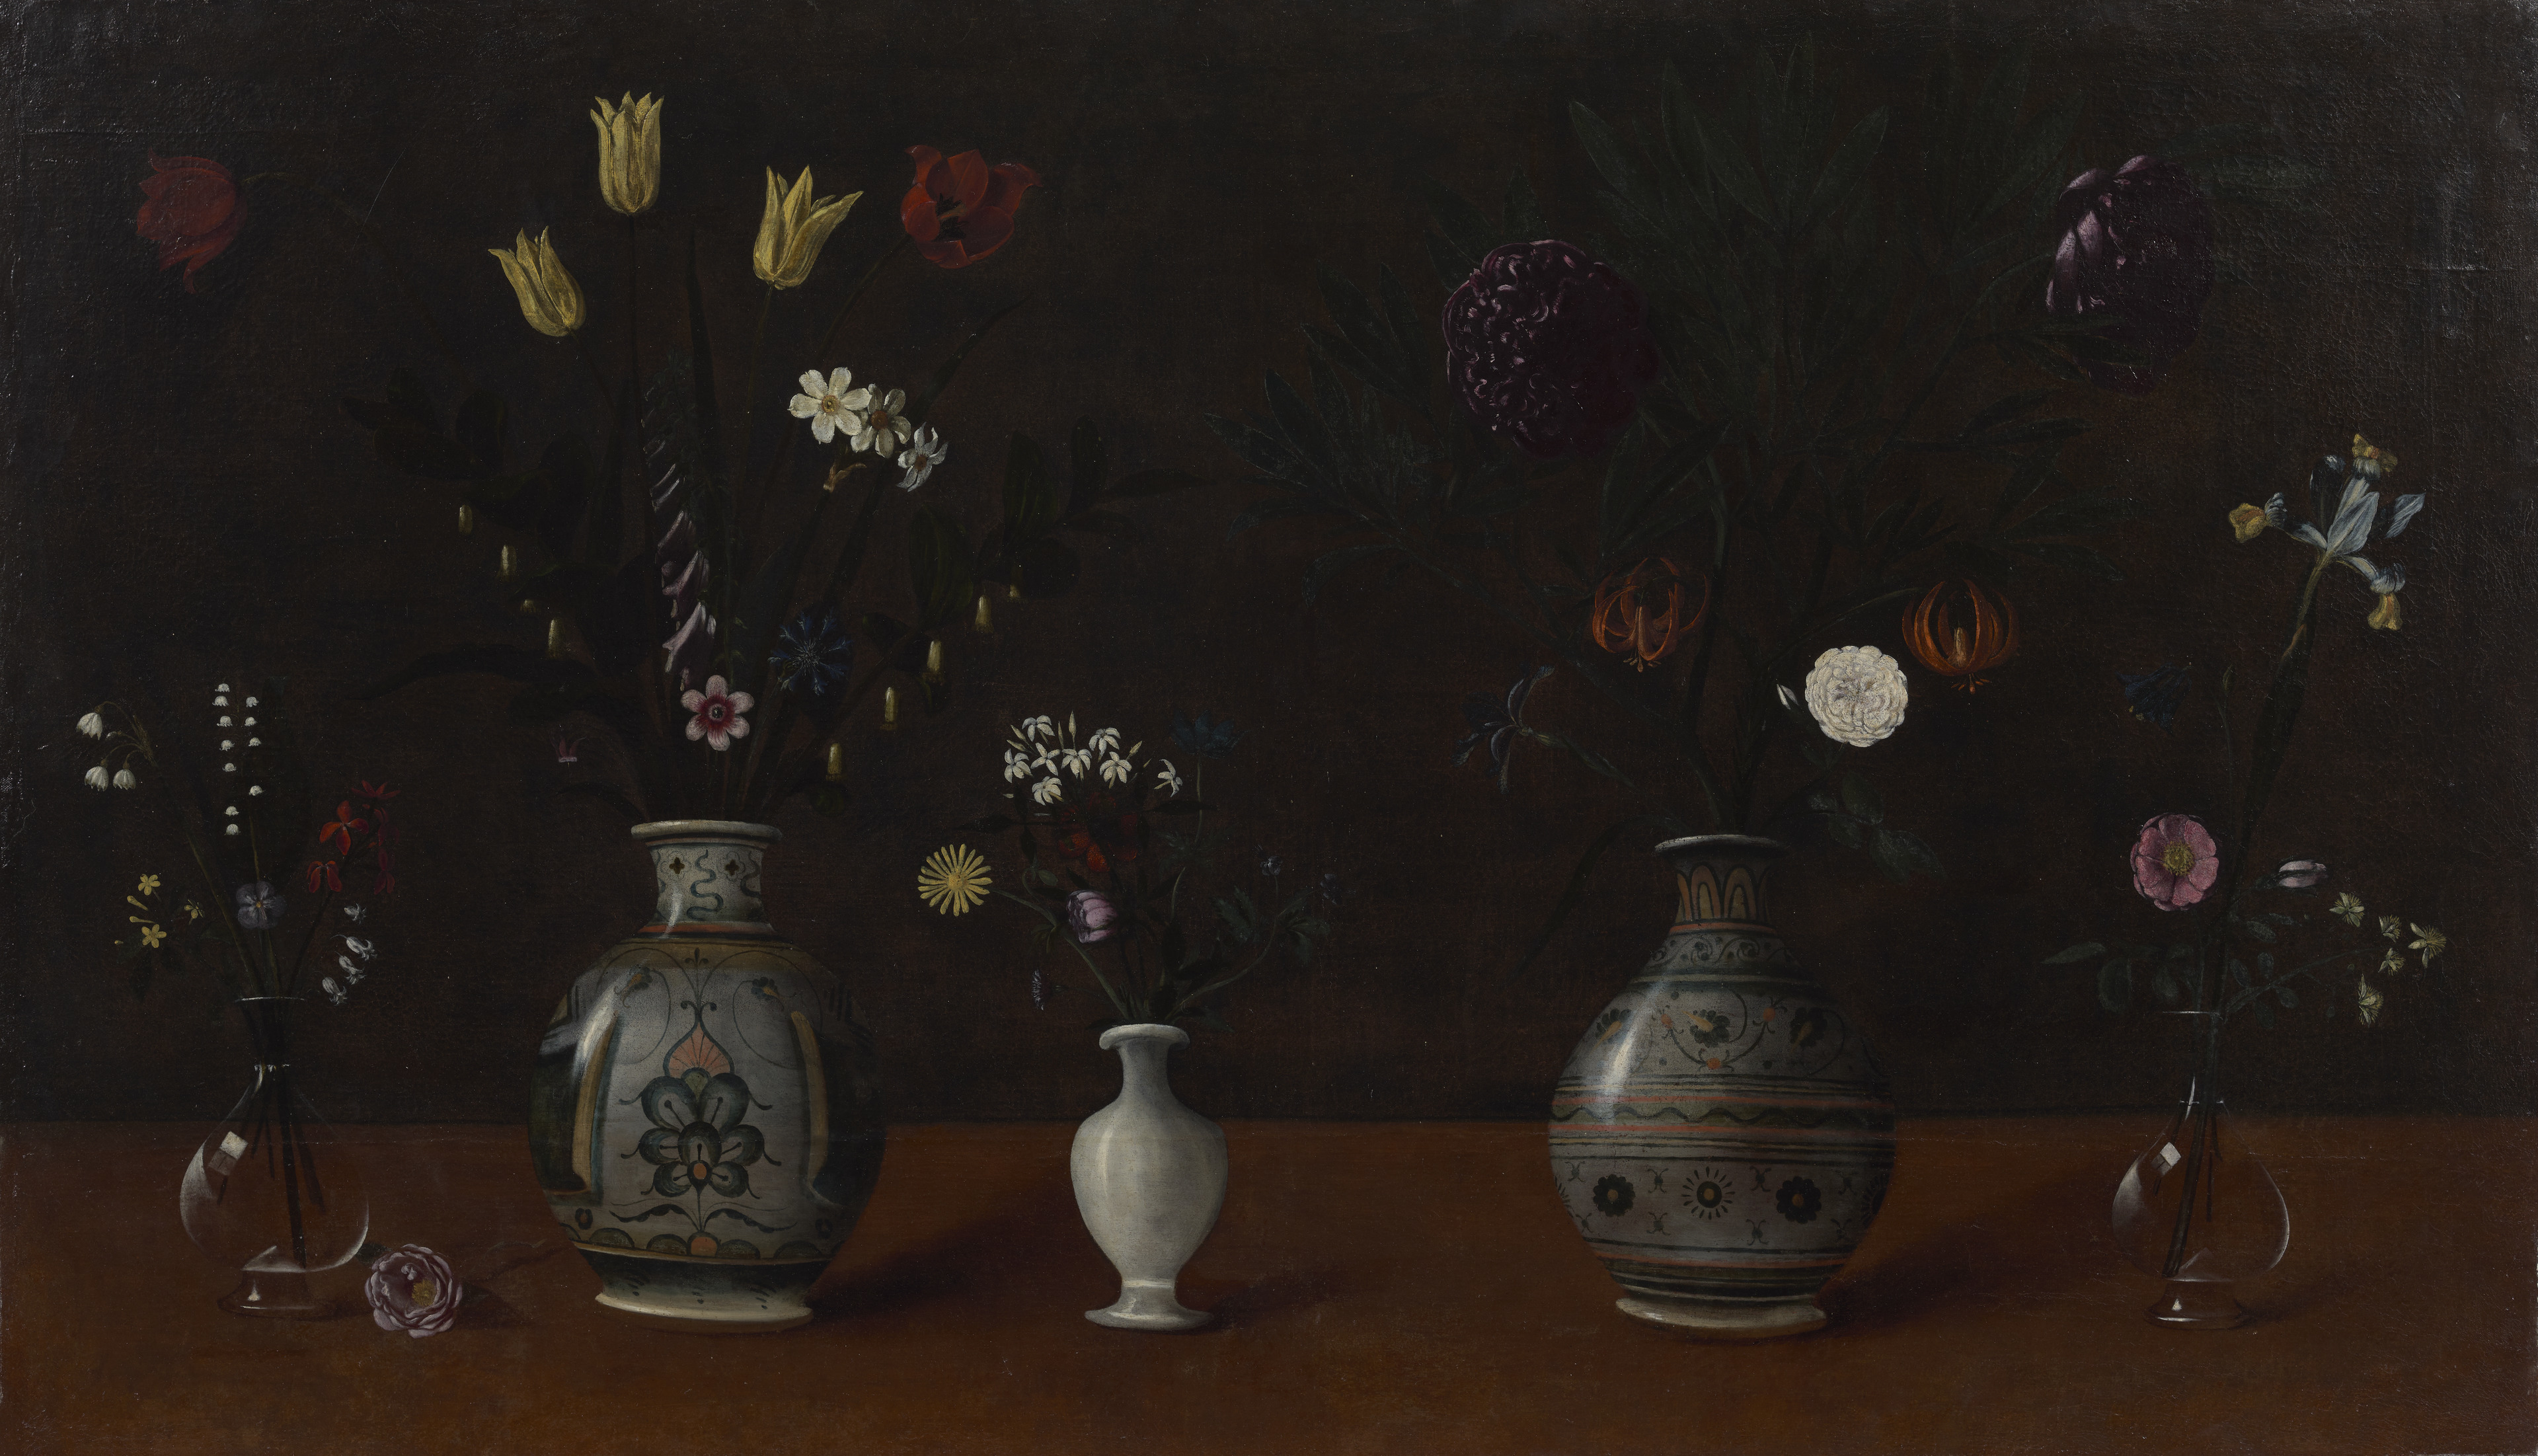 A still life painting of five vases on a table, filled with different flowers. Two of the vases are painted with intricate designs and two are glass; the one at the center is plain white ceramic. There is one light purple flower on the table, next to the glass vase on the left side of the canvas.